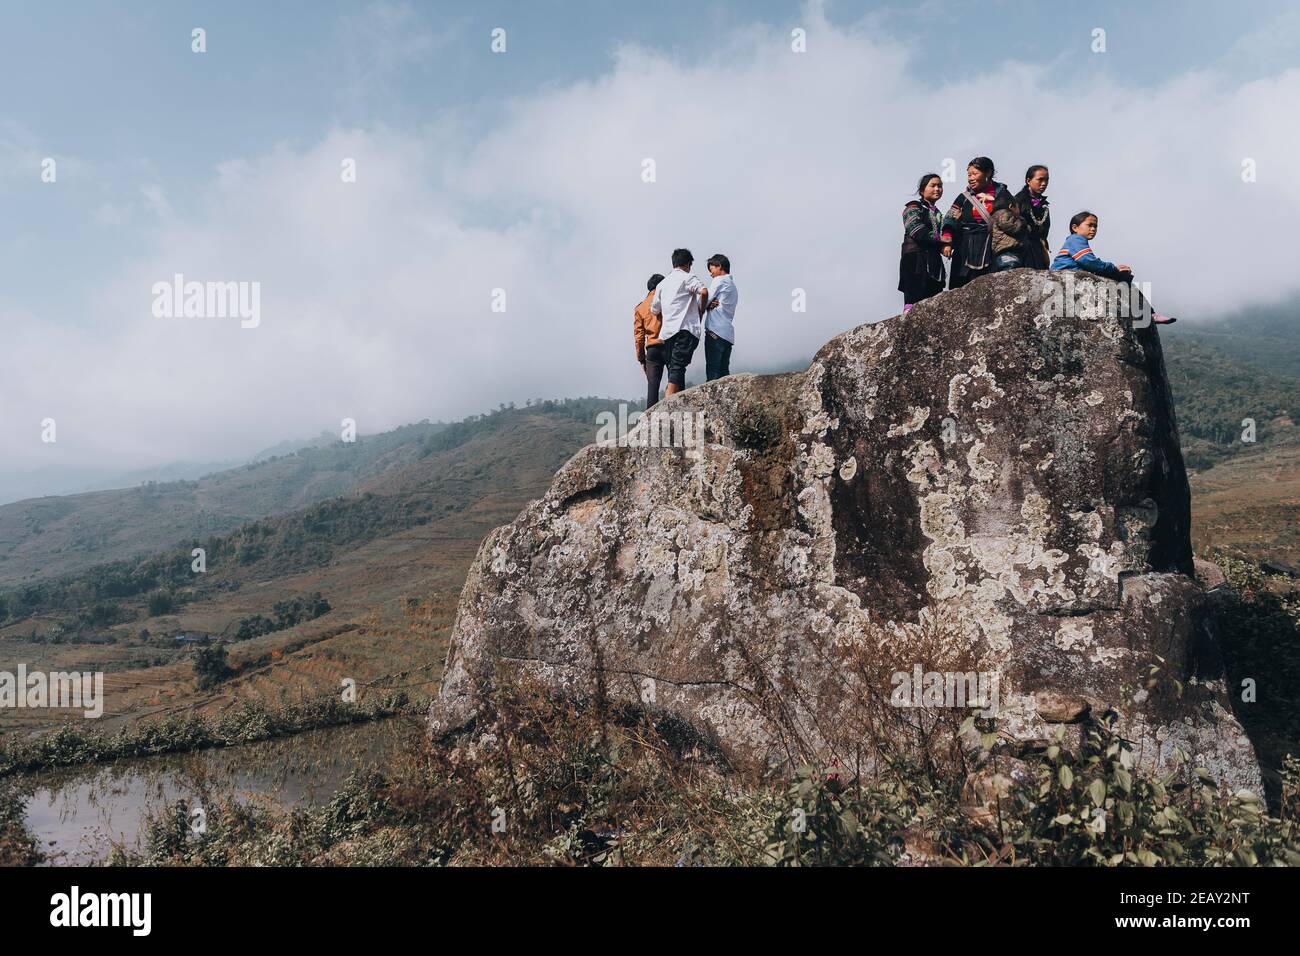 H'mong hill tribe people standing on top of a cliff in an open field surrounded by green hills with blue sky and white clouds. Stock Photo